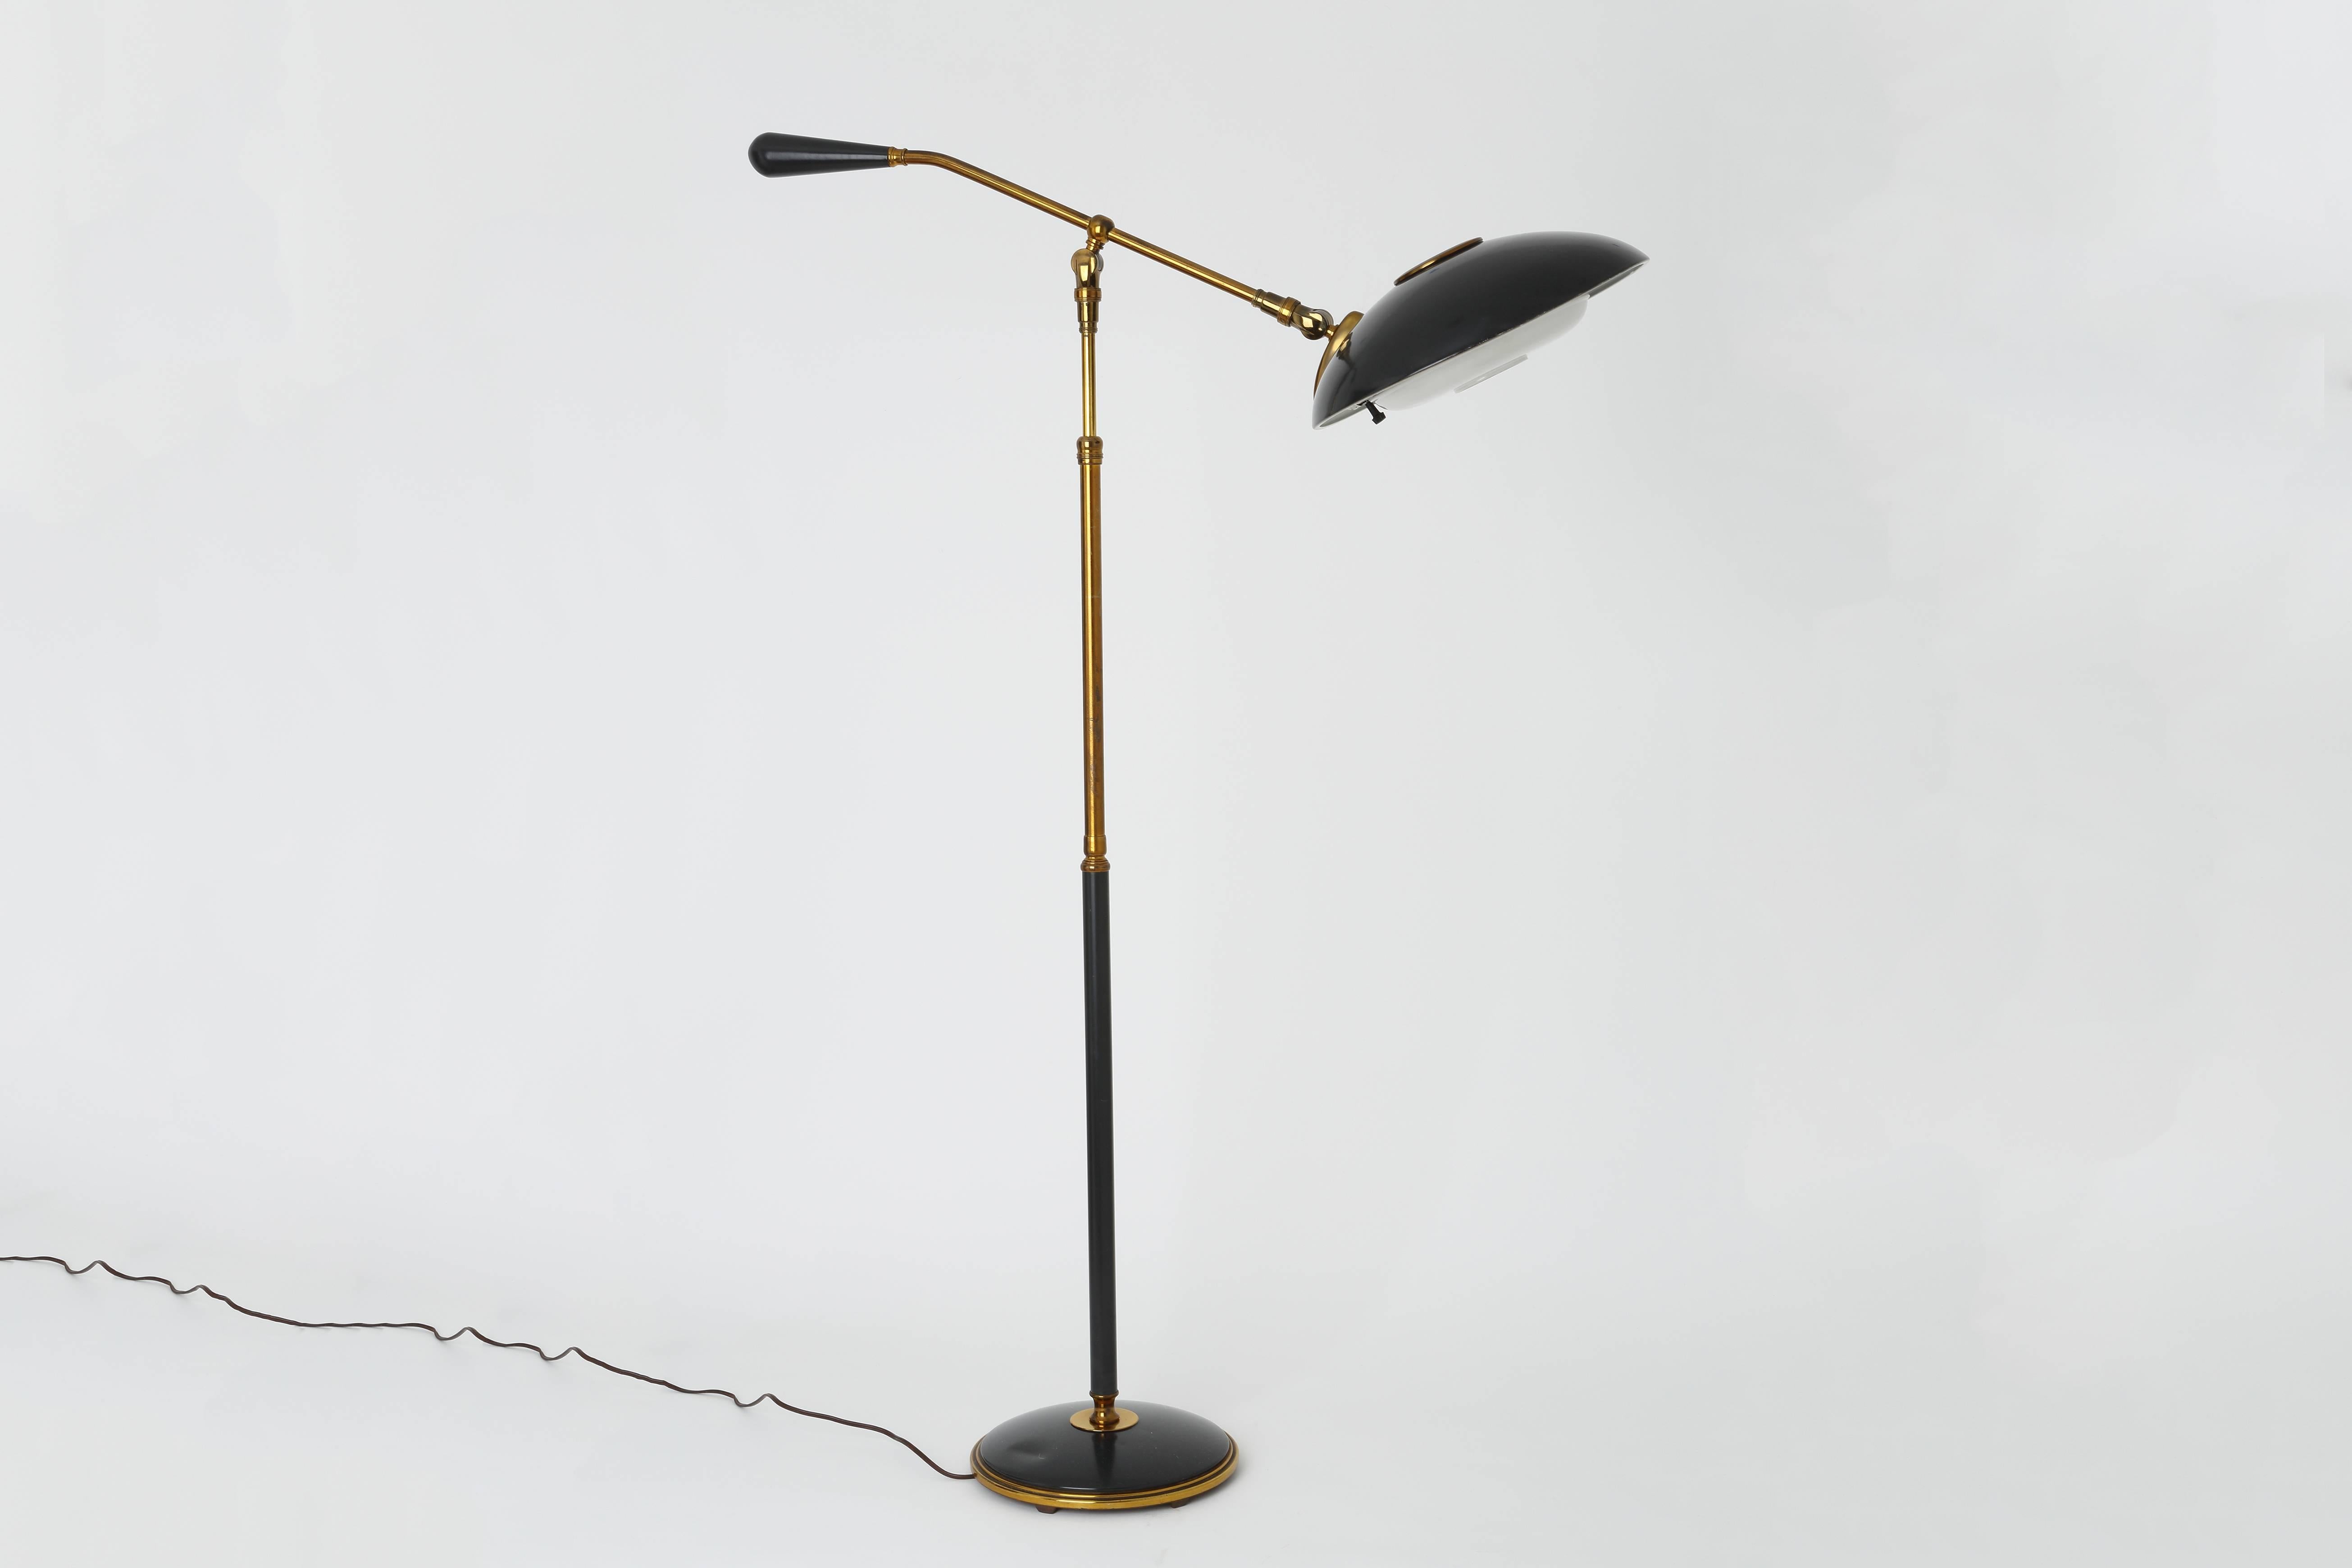 Gerald Thurston floor lamp for Lightolier.
Made out of brass, enameled metal and perforated metal.
Pole extends to 52 inches. Shade swivels in all directions.
 